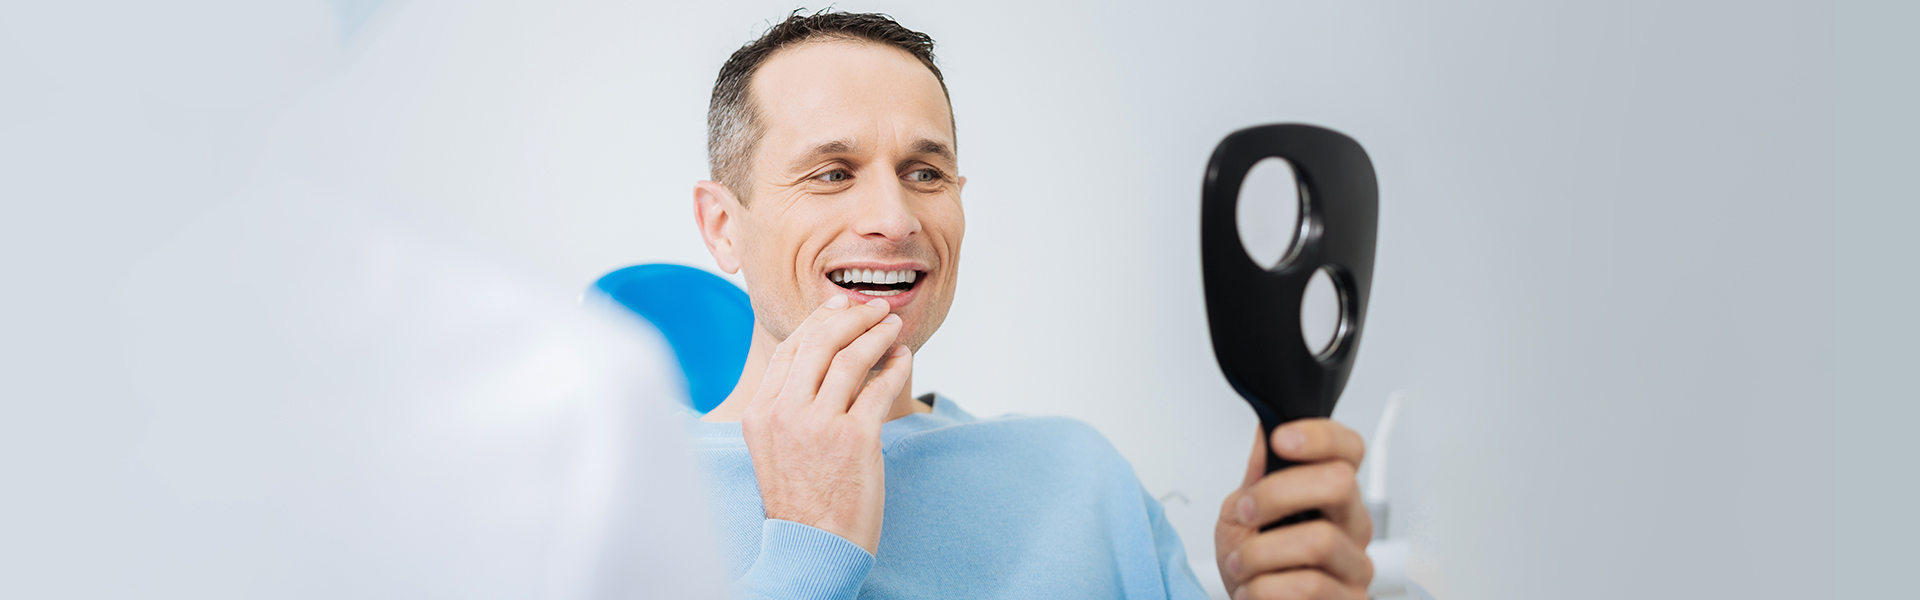 why you should have regular dental exam and cleaning procedures